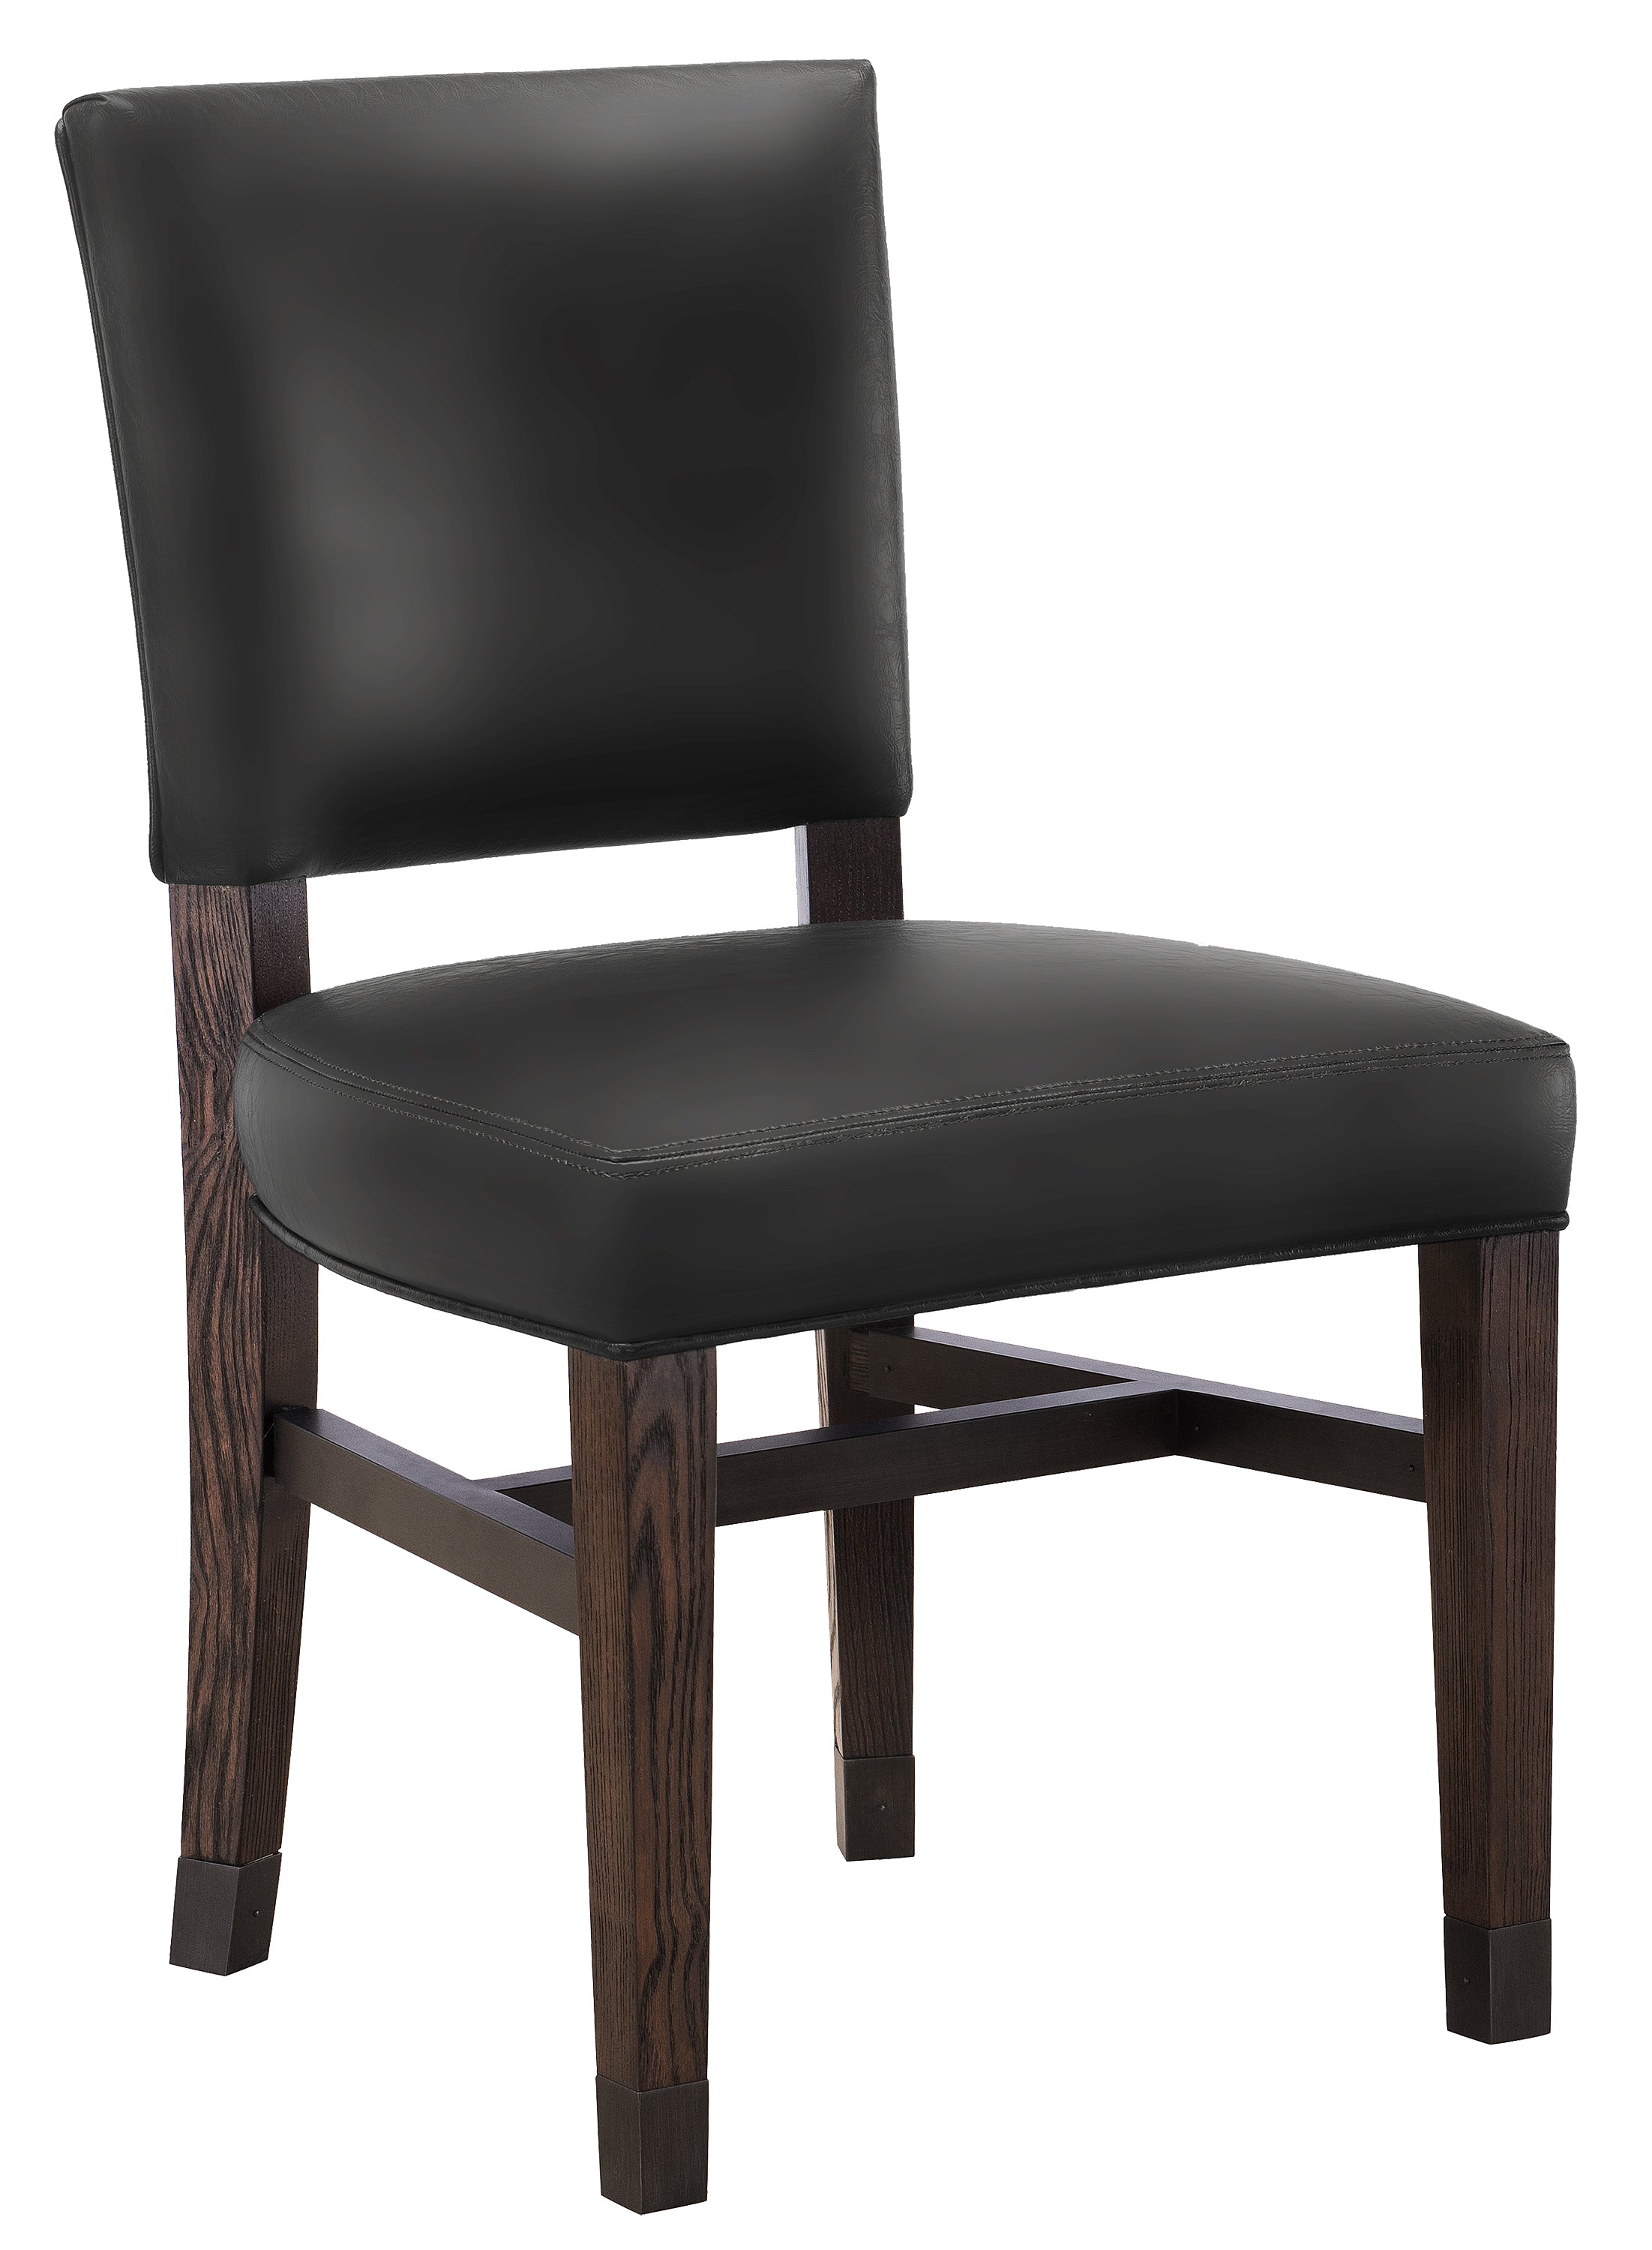 Legacy Billiards Harpeth Dining Chair in Whiskey Barrel Finish Primary Image